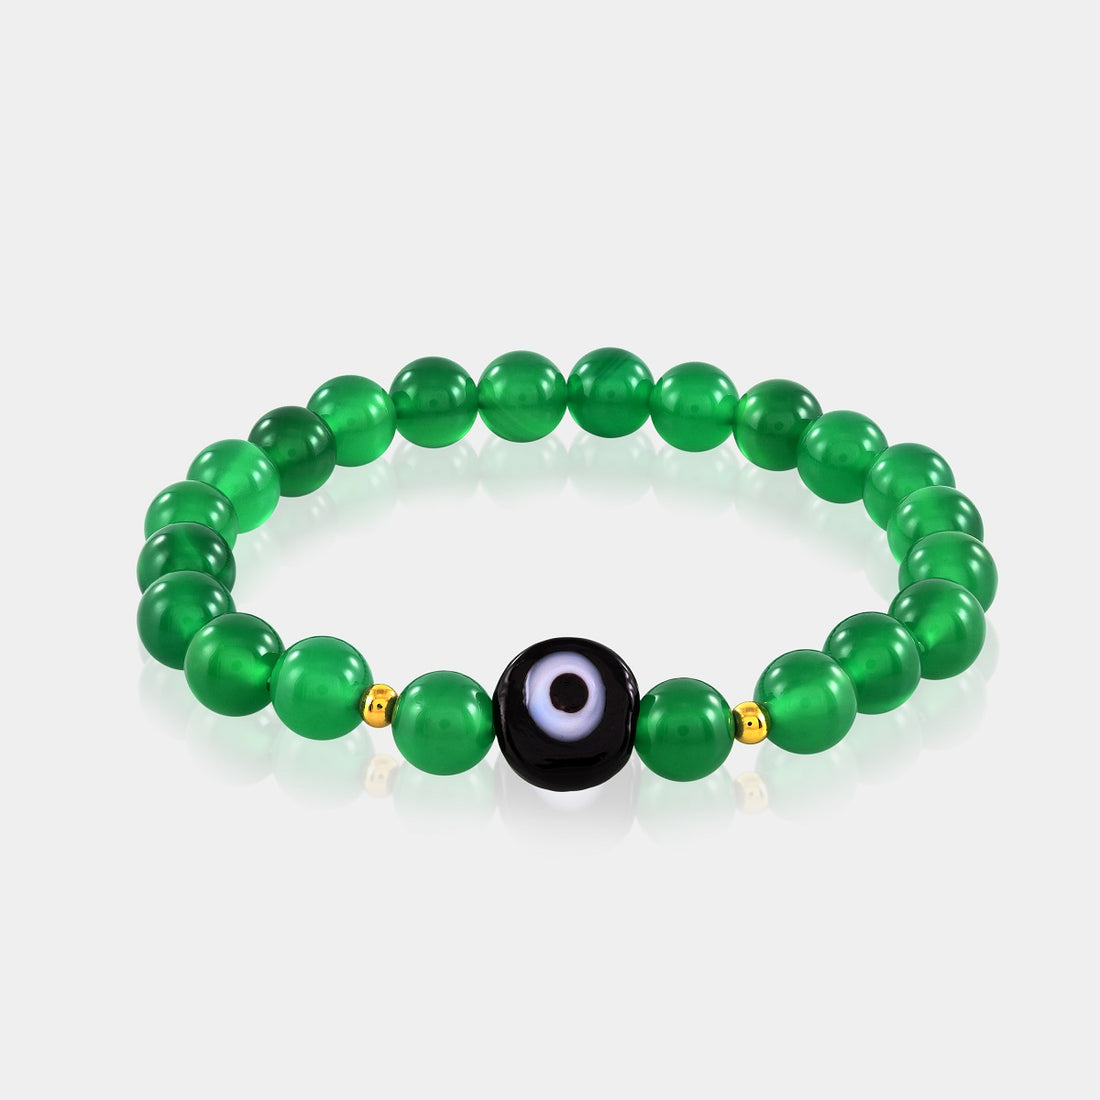 Green Onyx gemstone beads in rich green color